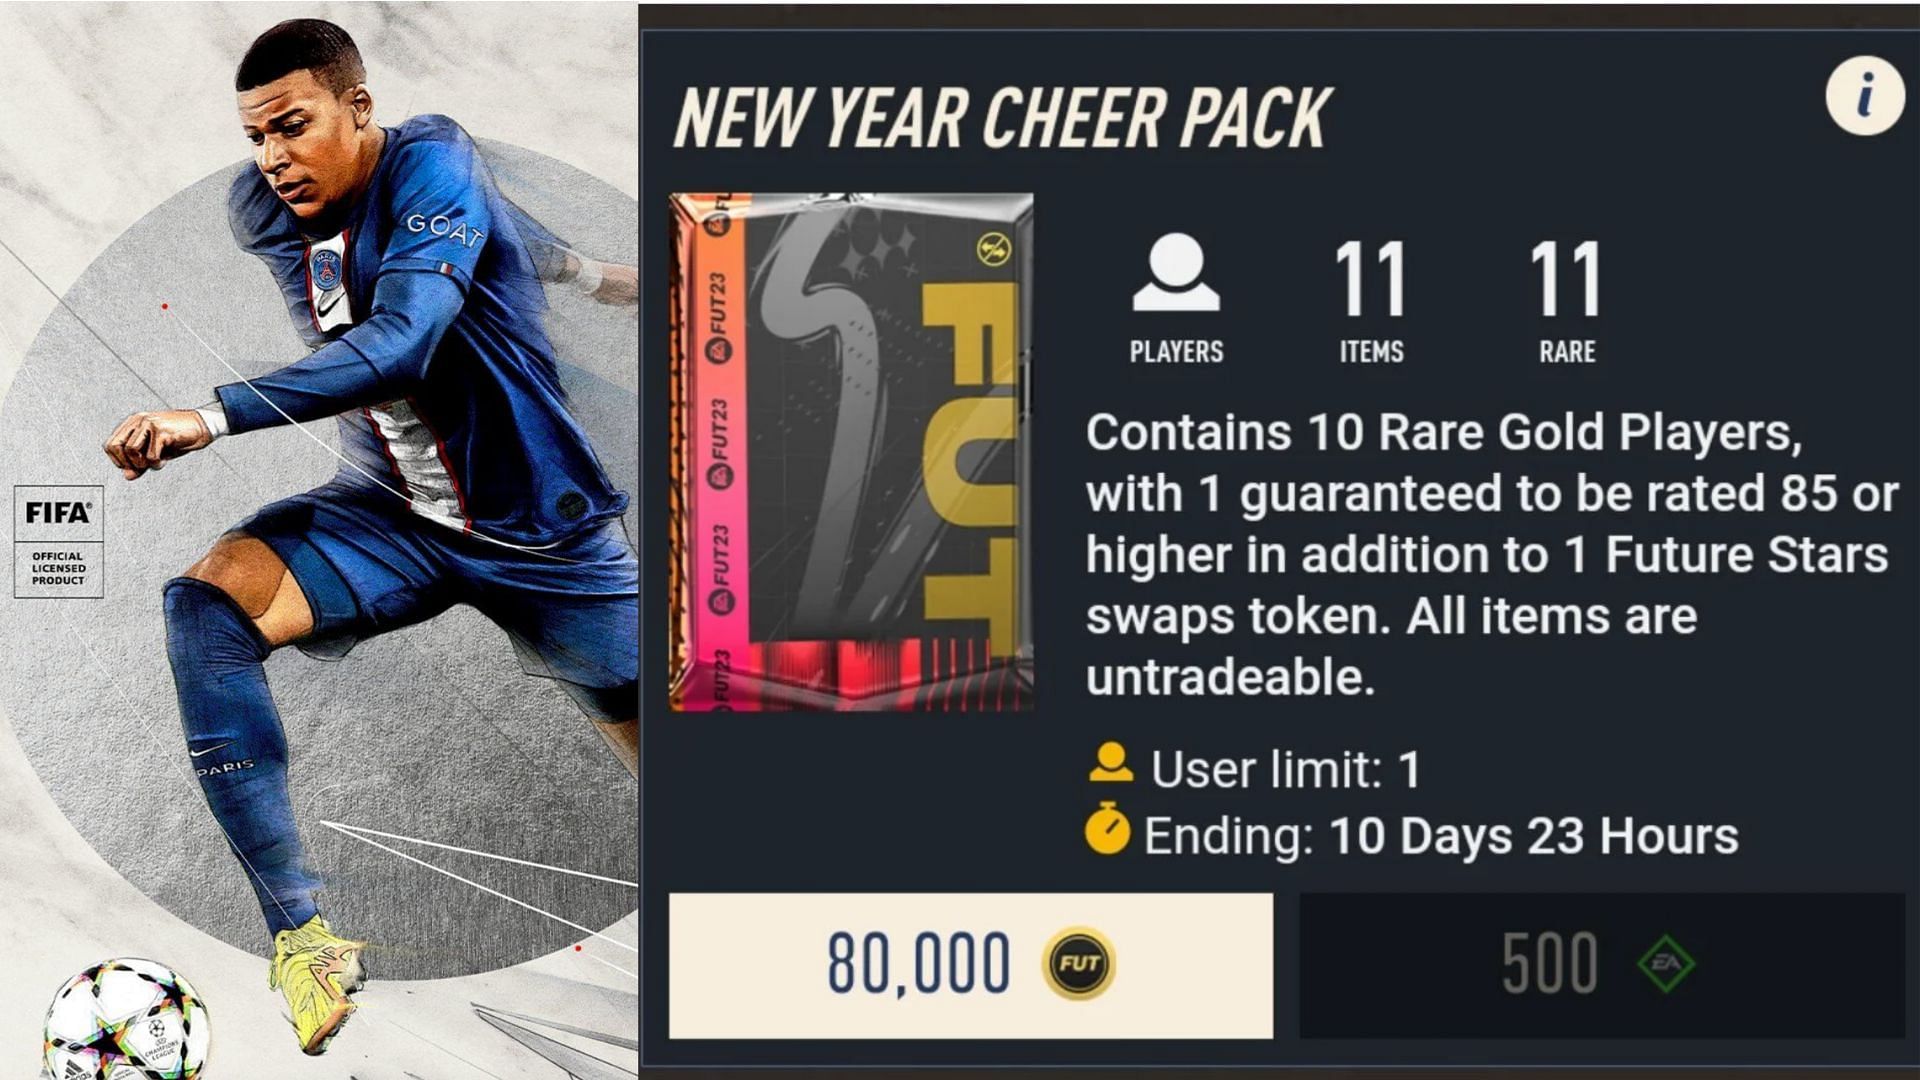 The New Year Cheer Pack was launched in February (Images via EA Sports)